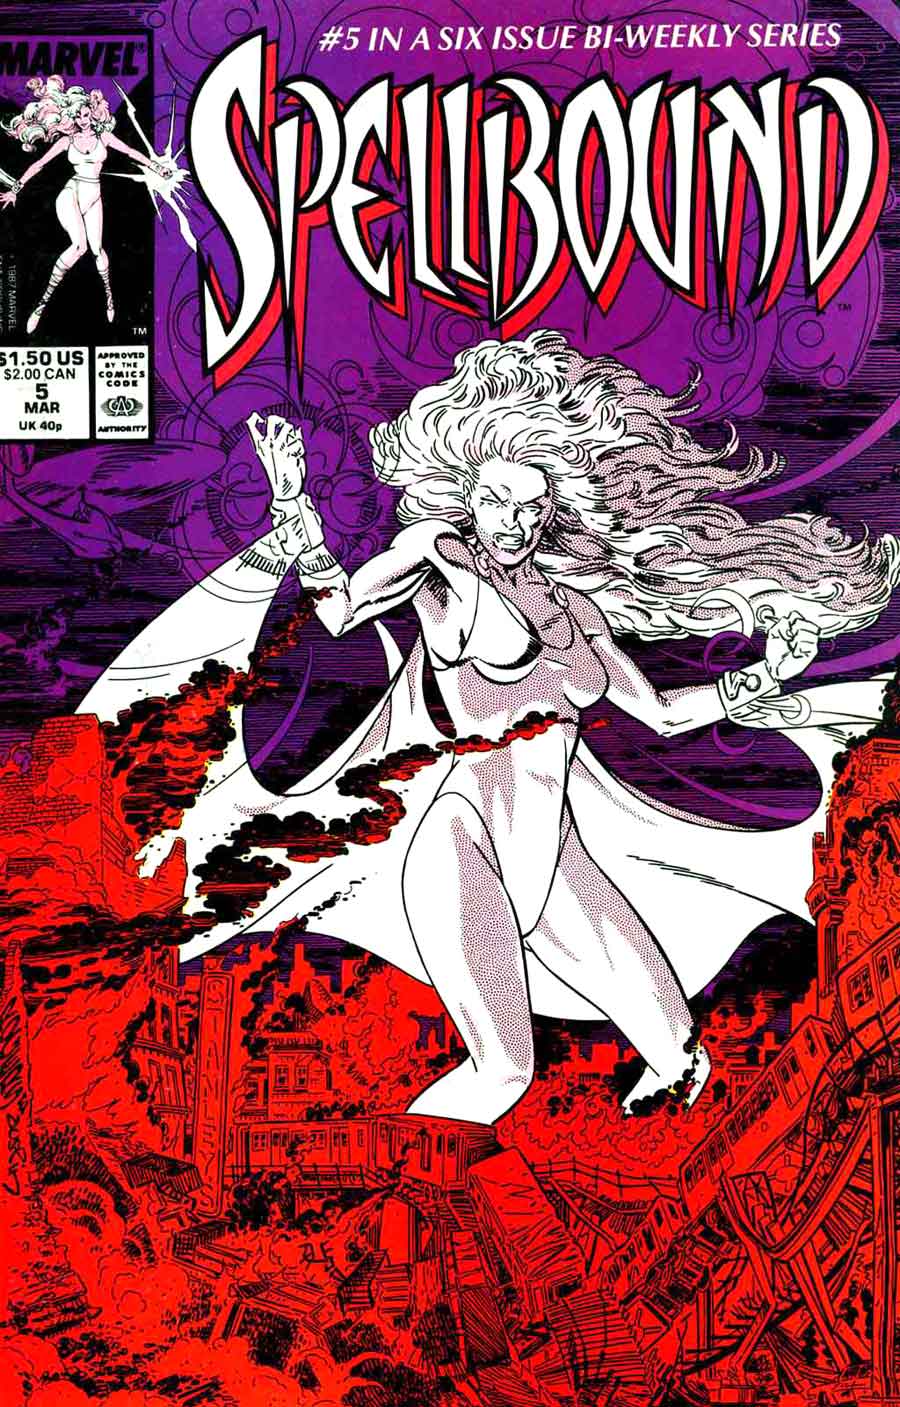 Marshall Rogers 1980s marvel comic book cover - Spellbound v2 #5